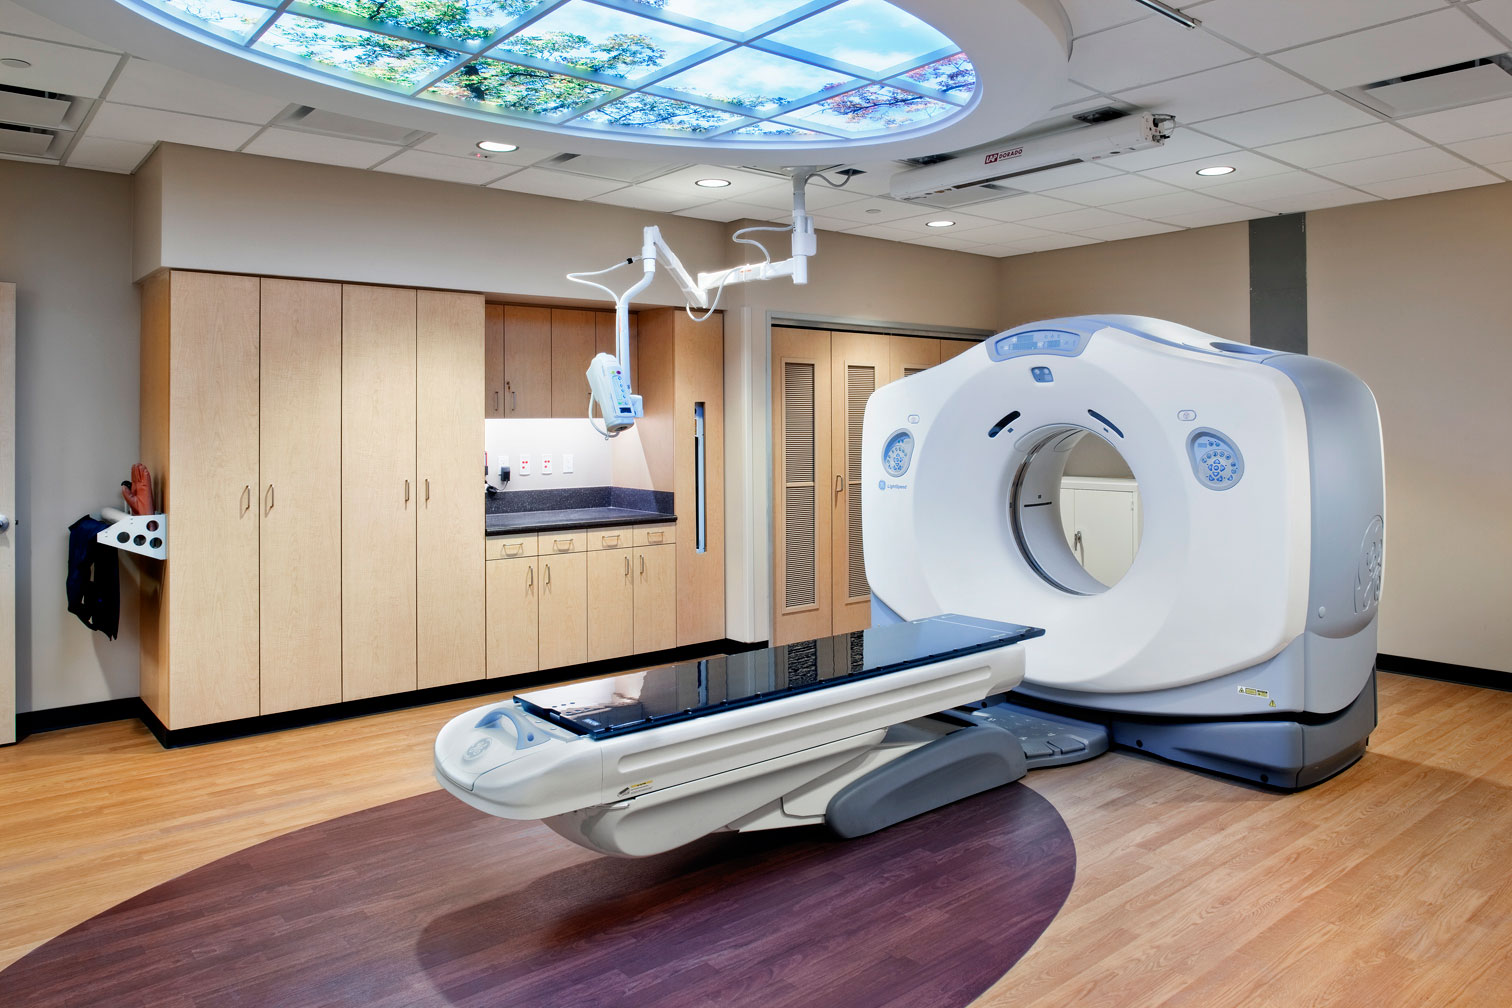 Melton Electrical & Structured Cabling Memorial Hermann Hospital Linear Accelerator Project